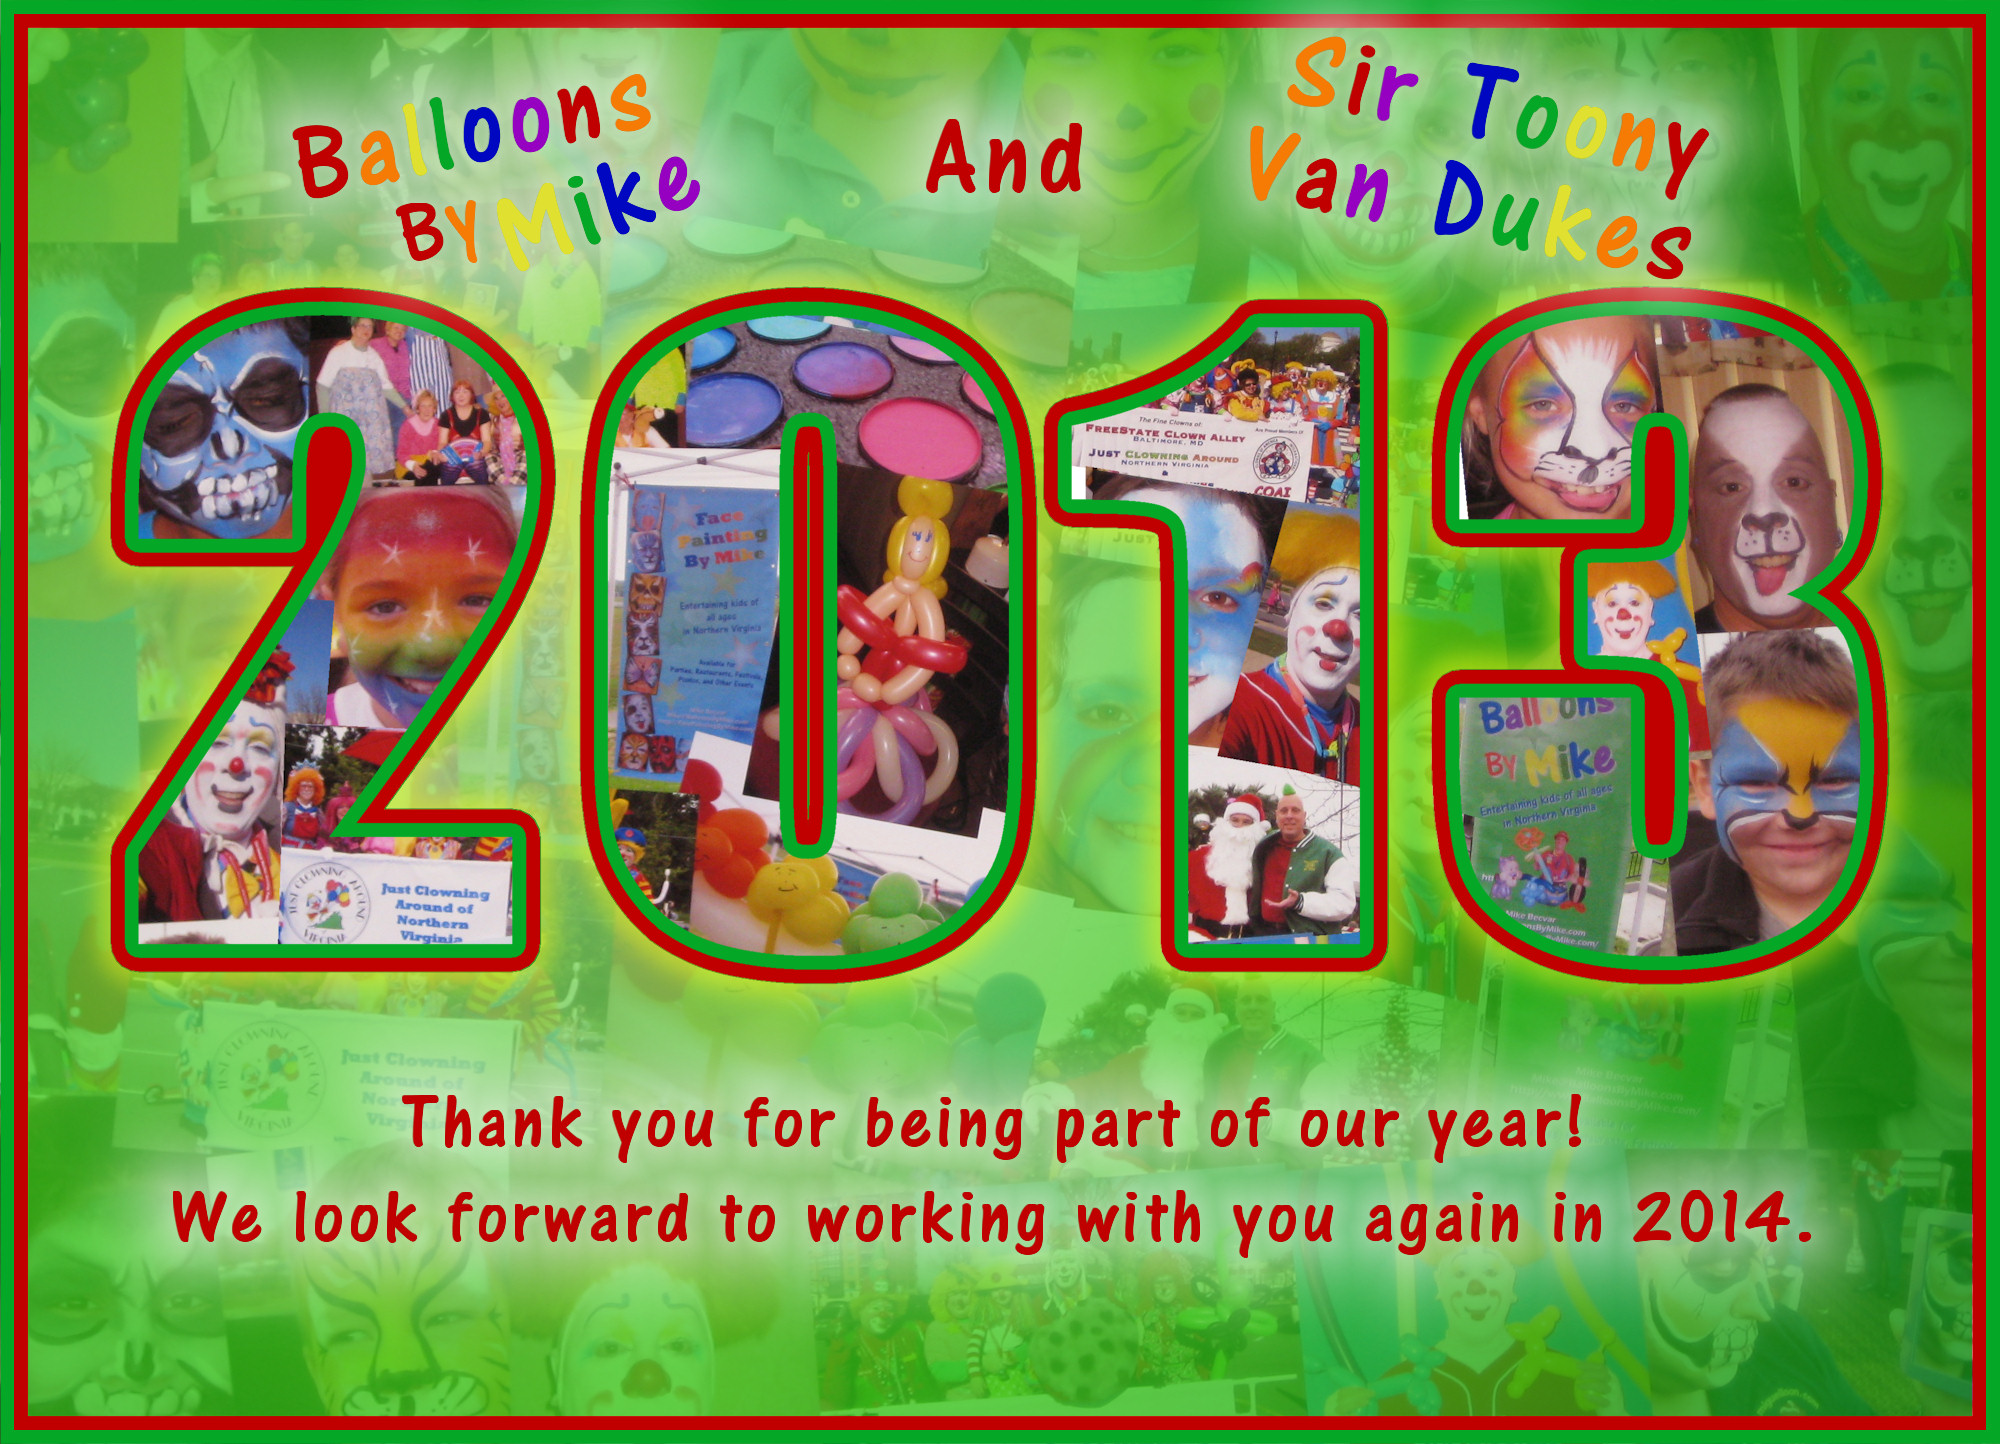 Balloons By Mike and Sir Toony Van Dukes thank you for being part of our year.